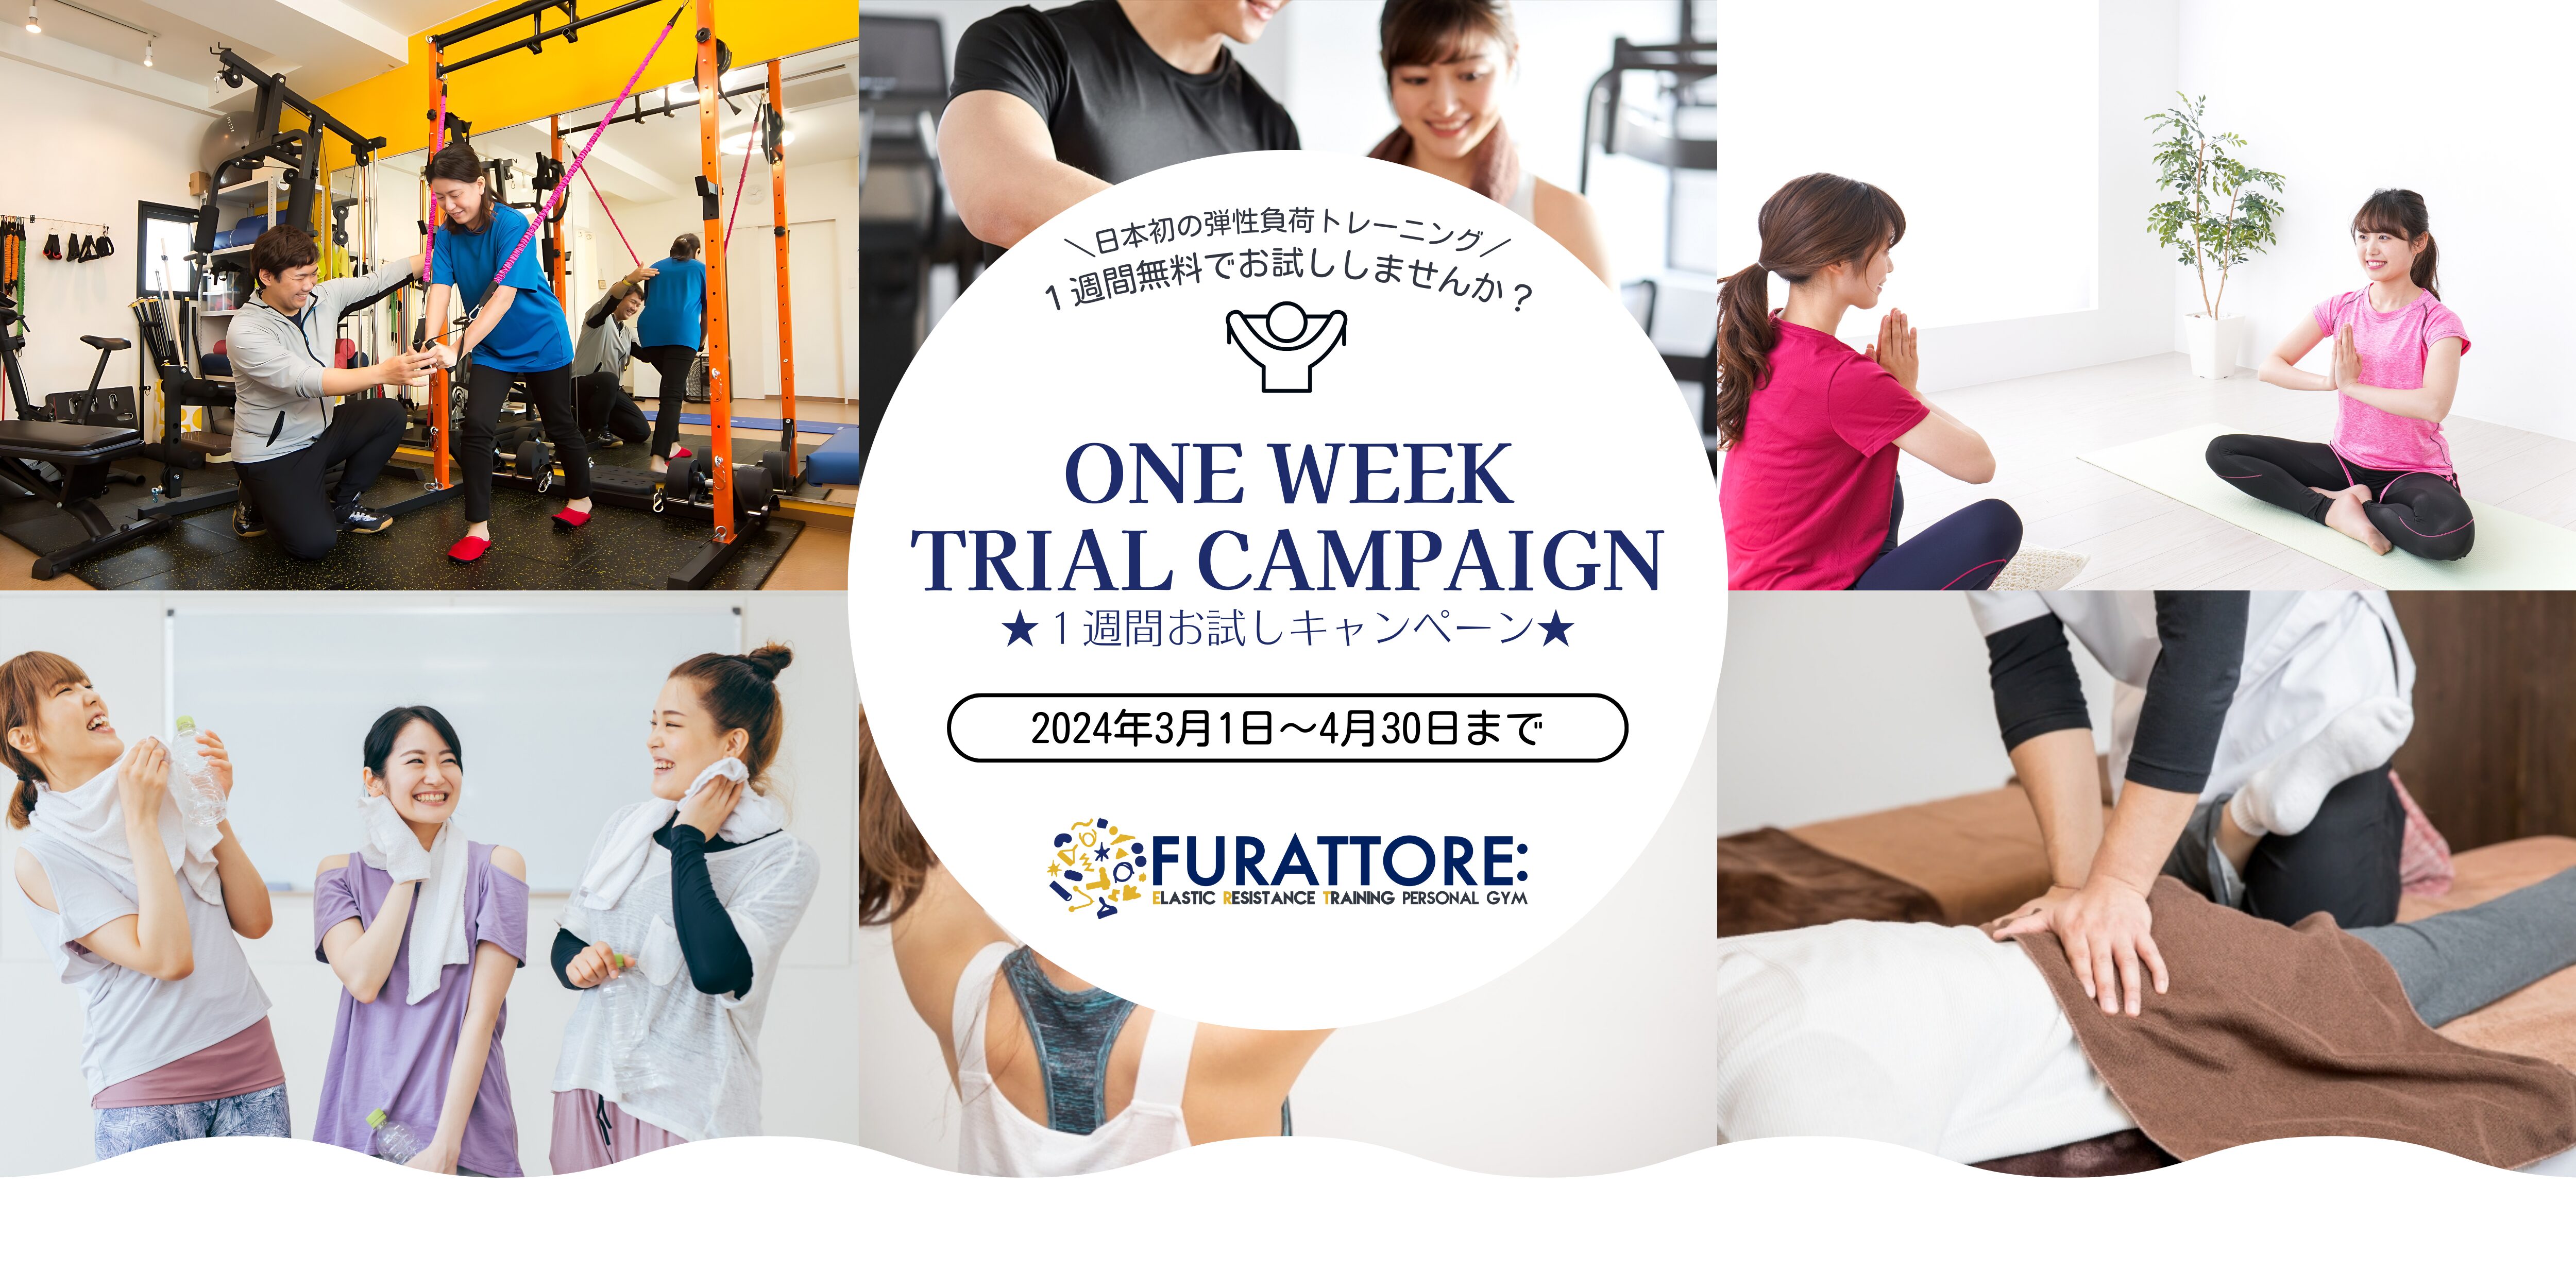 one week trial campaign★１週間お試しキャンペーン★